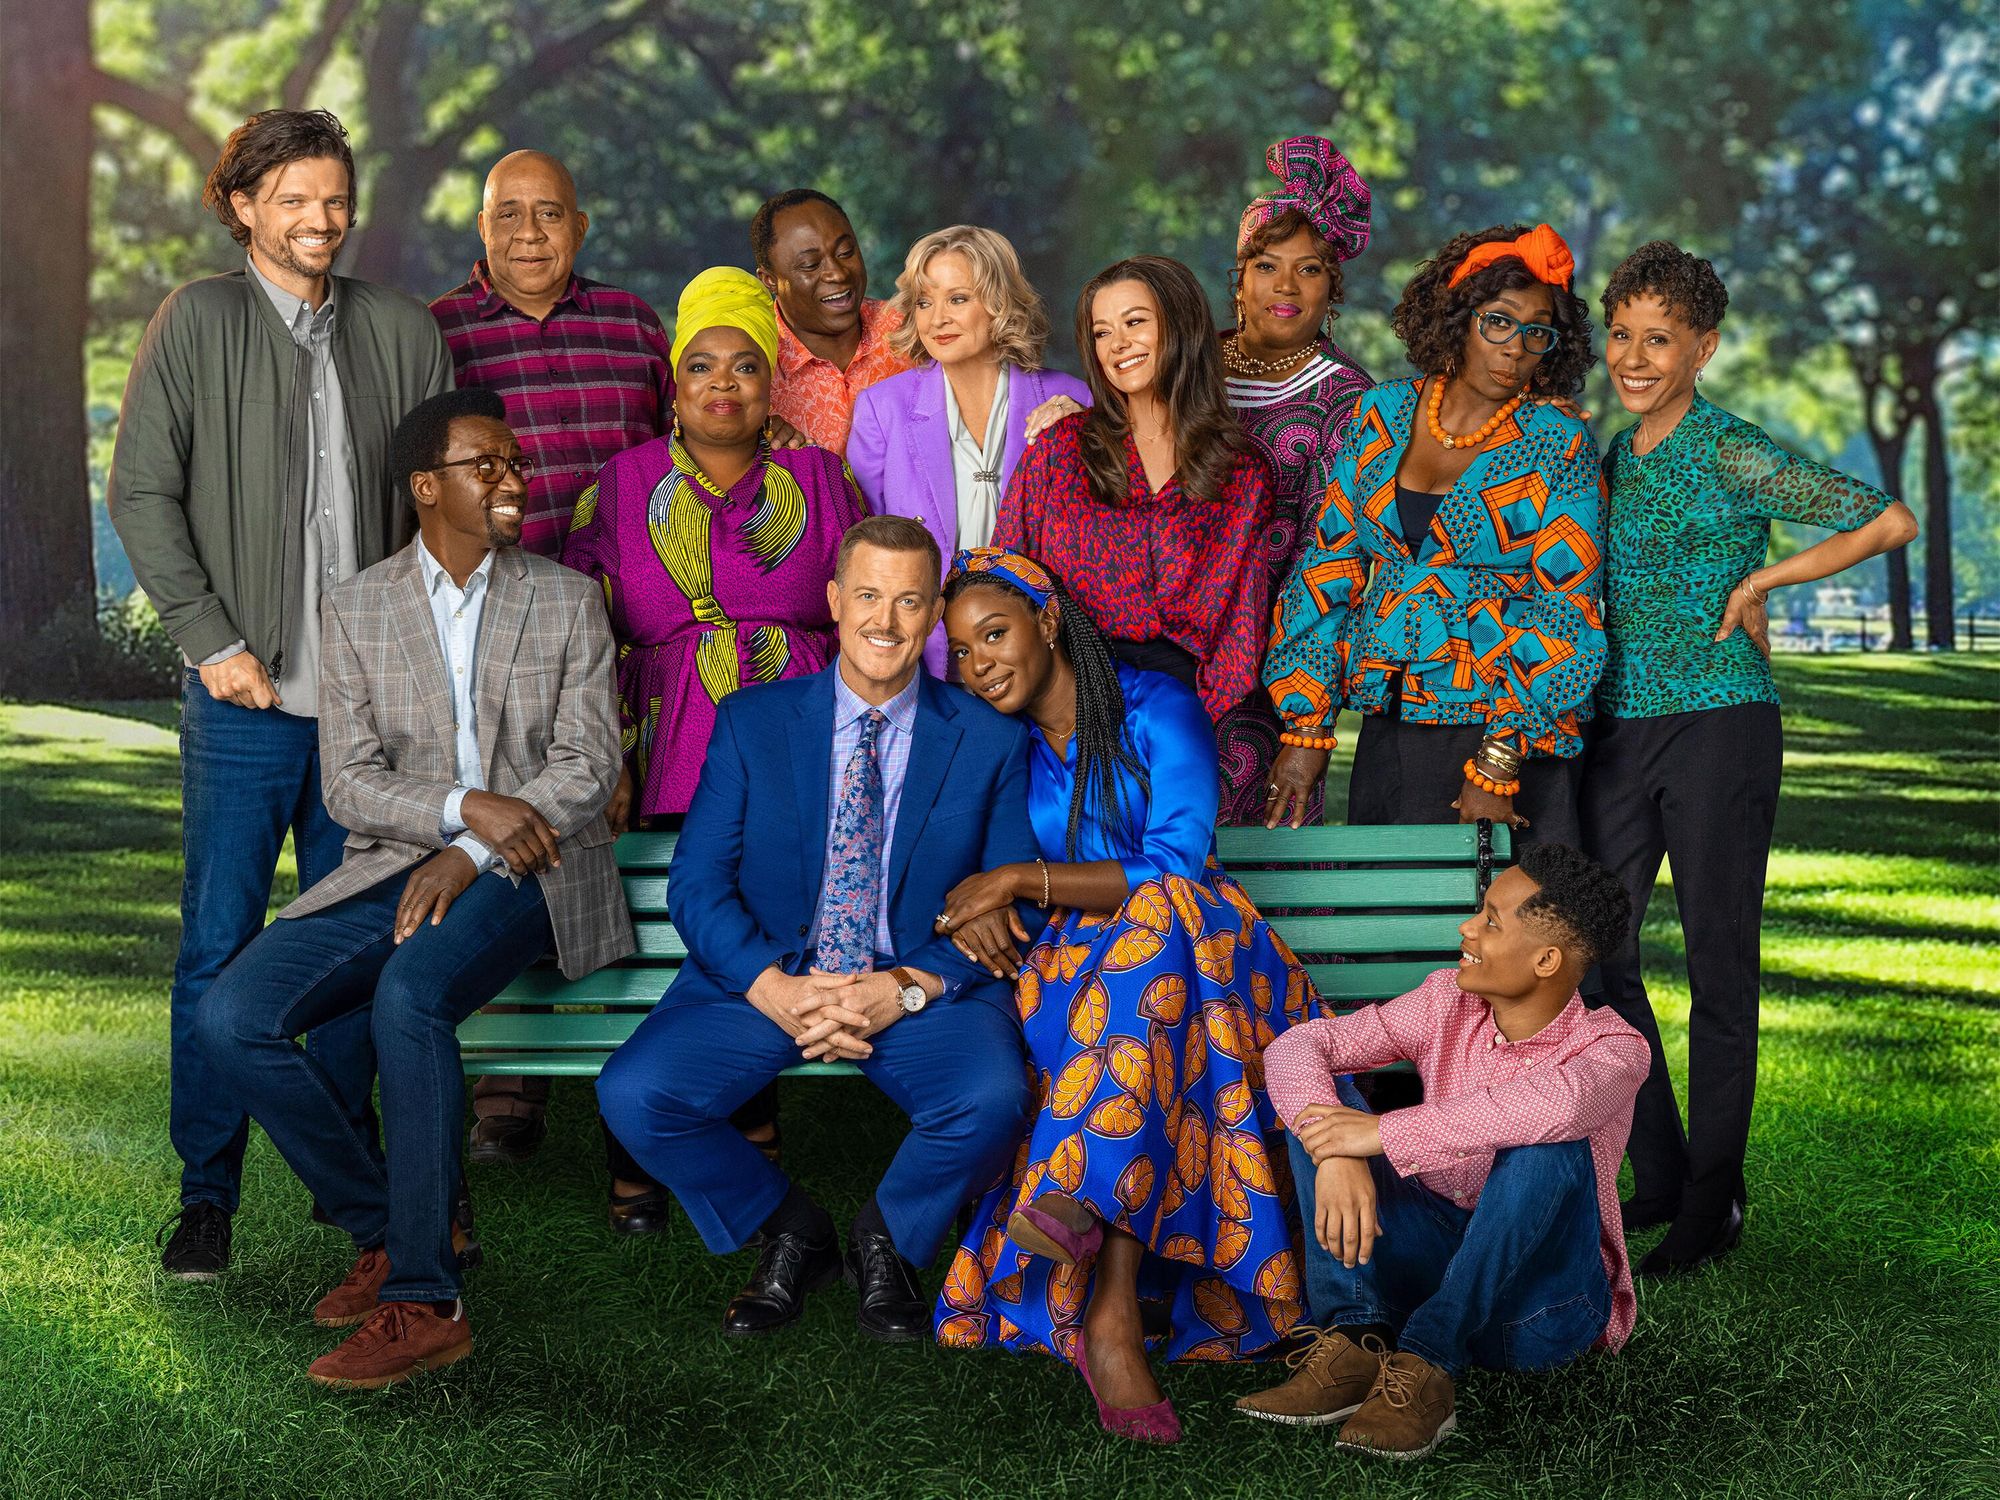 The cast of Bob Hearts Abishola surrounds the two stars of the show as they sit together on their favorite park bench.